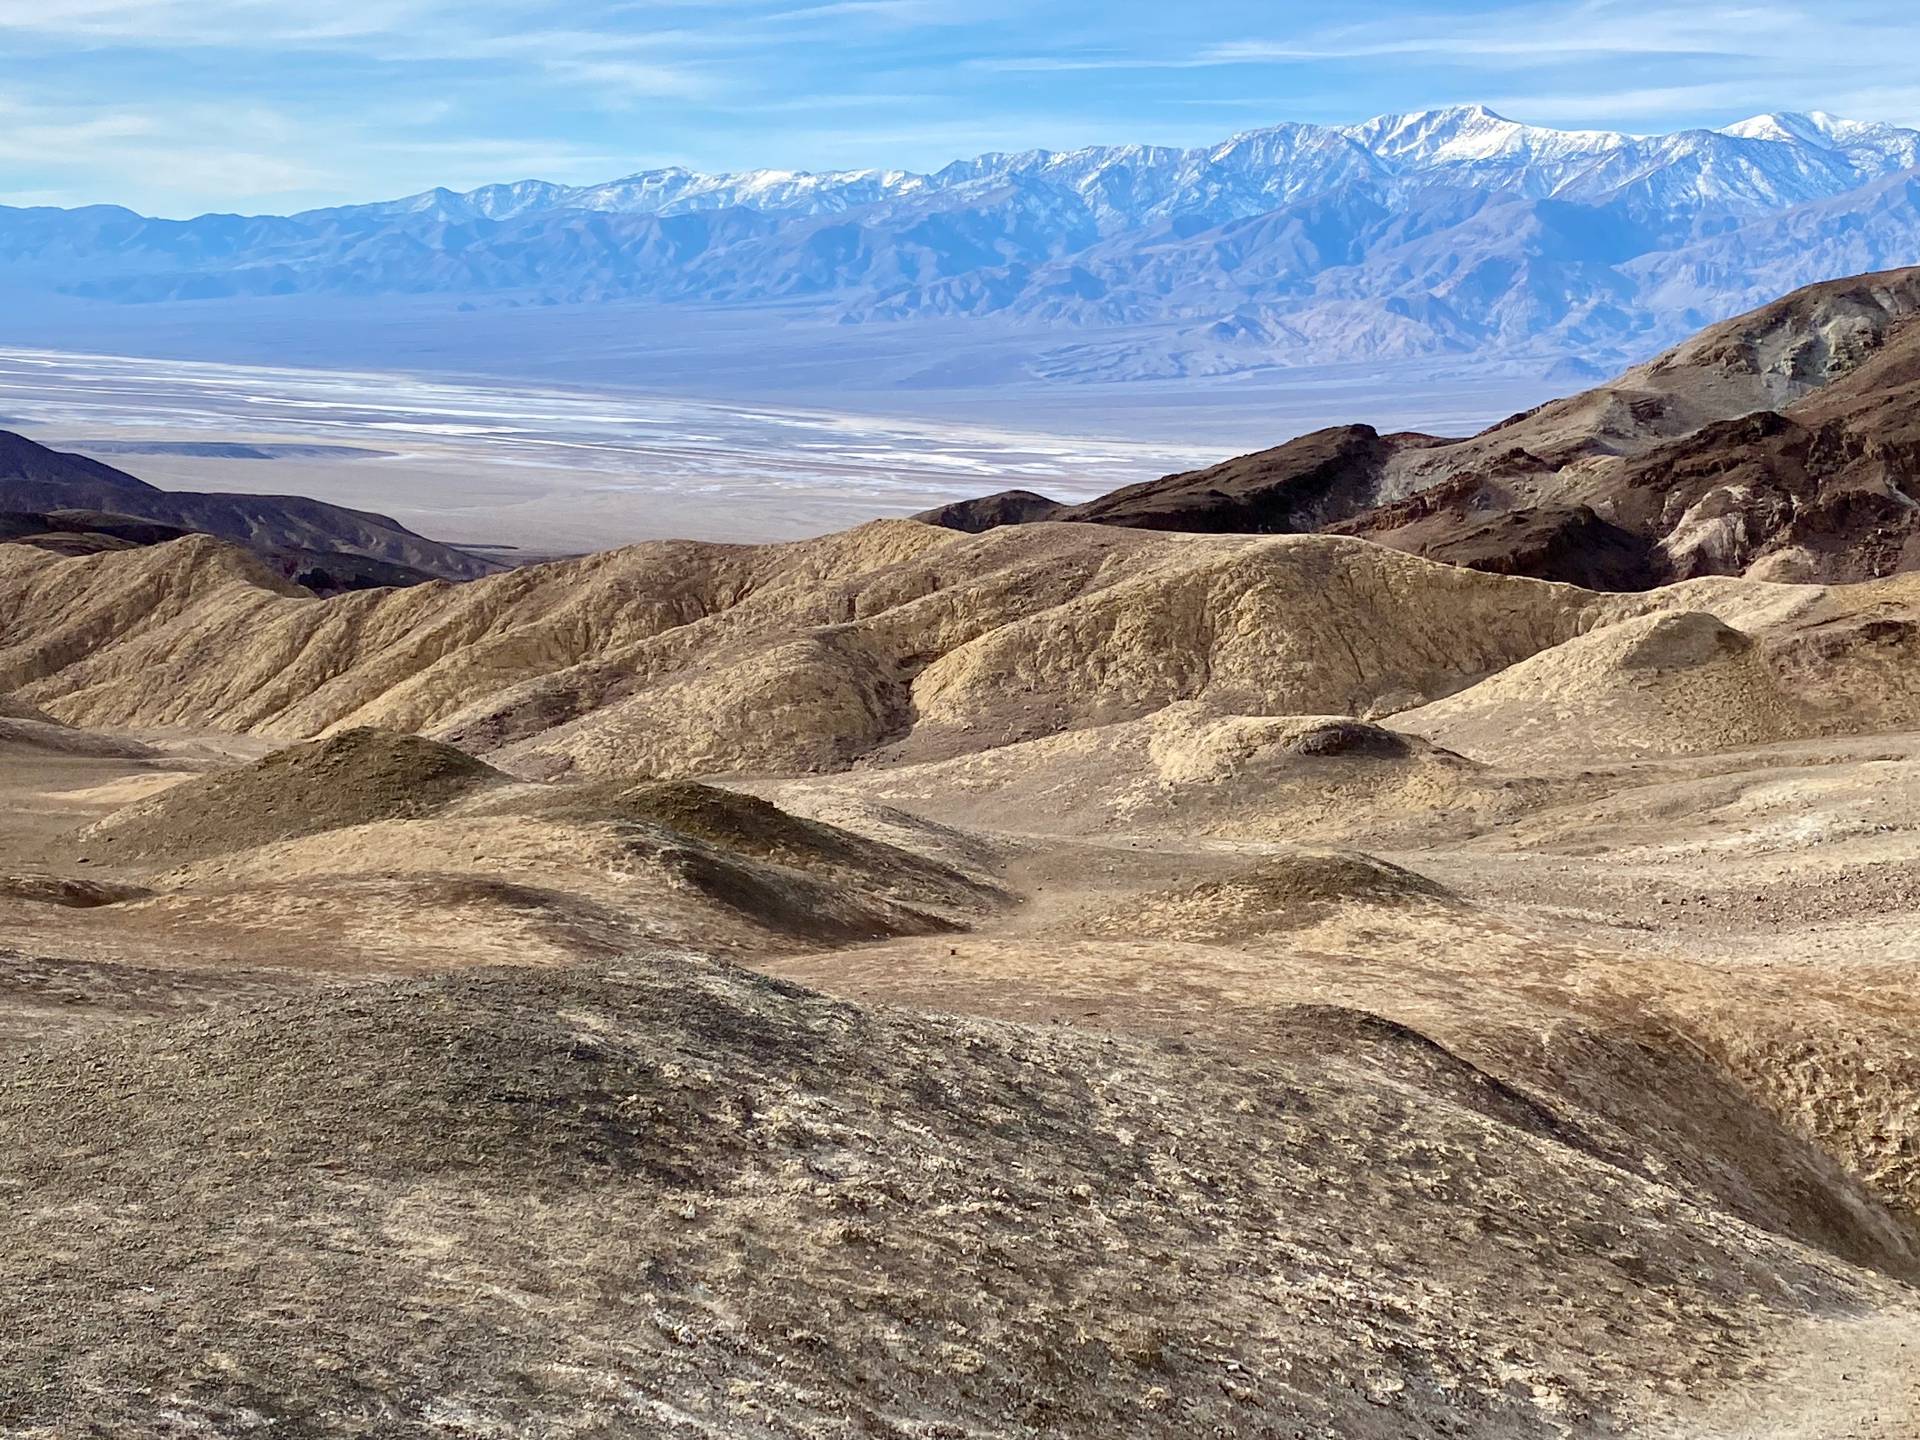 Views of Badwater Basin and Telescope Peak from Desolation Canyon, Death Valley National Park, California